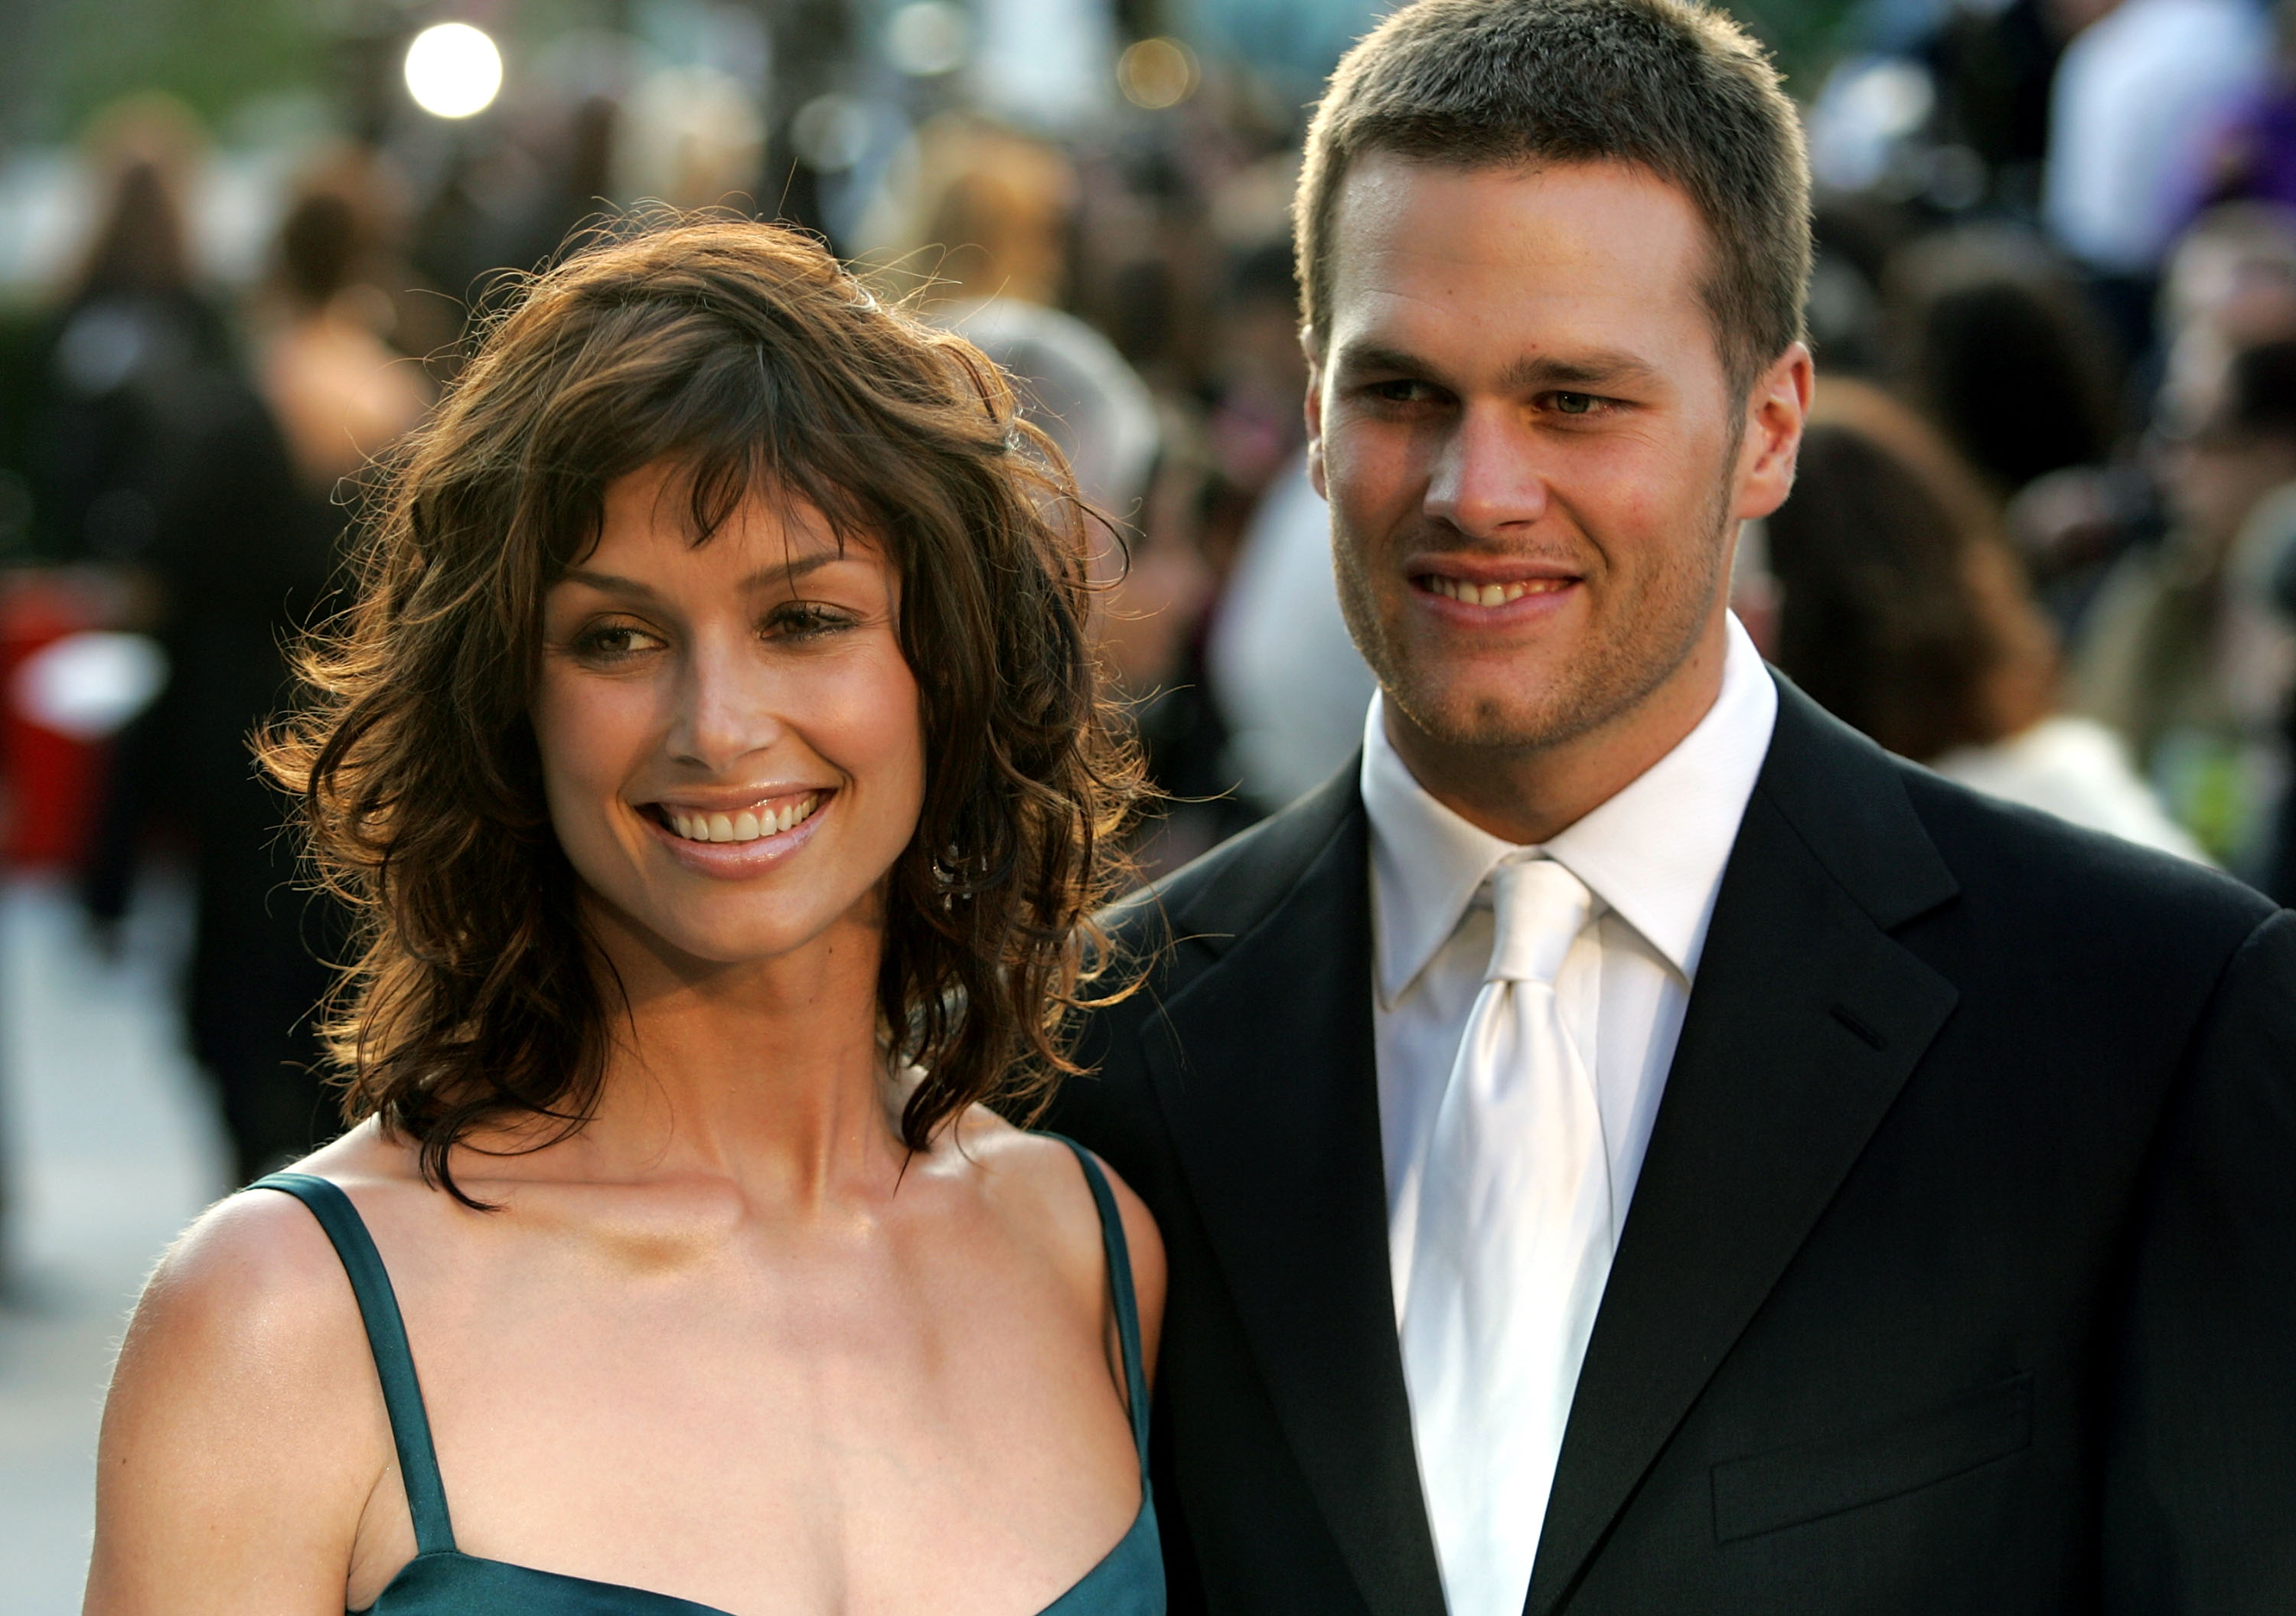 Bridget Moynahan and quarterback Tom Brady and arrives at the Vanity Fair Oscar Party at Mortons on February 27, 2005 in West Hollywood, California | Source: Getty Images